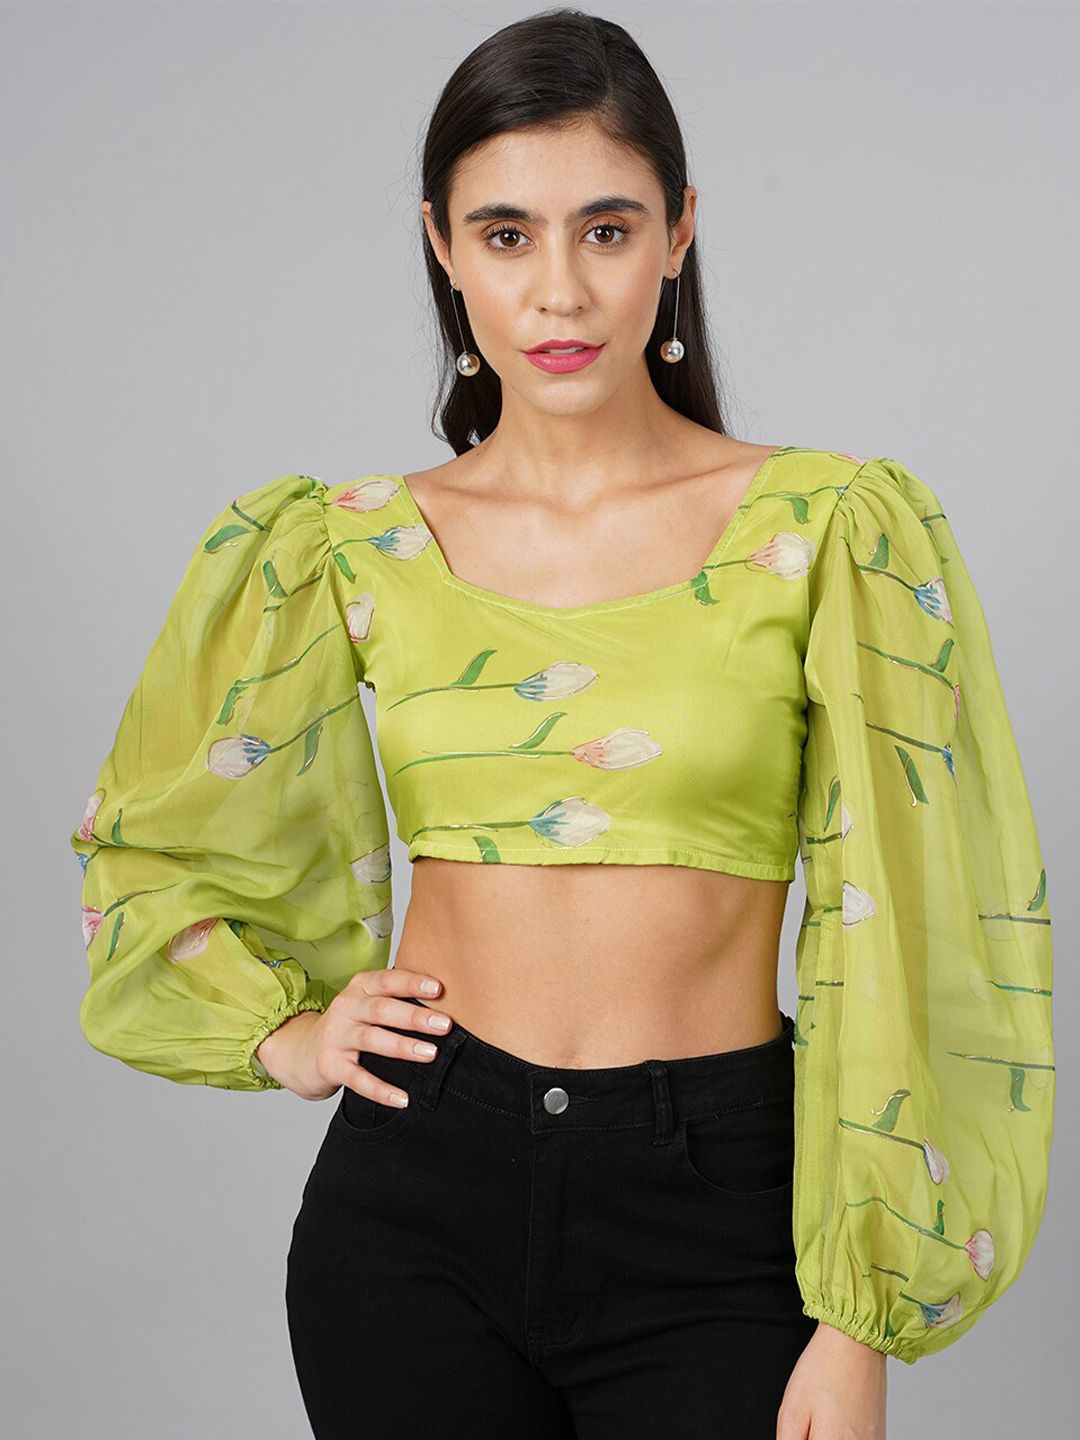 Cation Floral Printed Crop Top Price in India